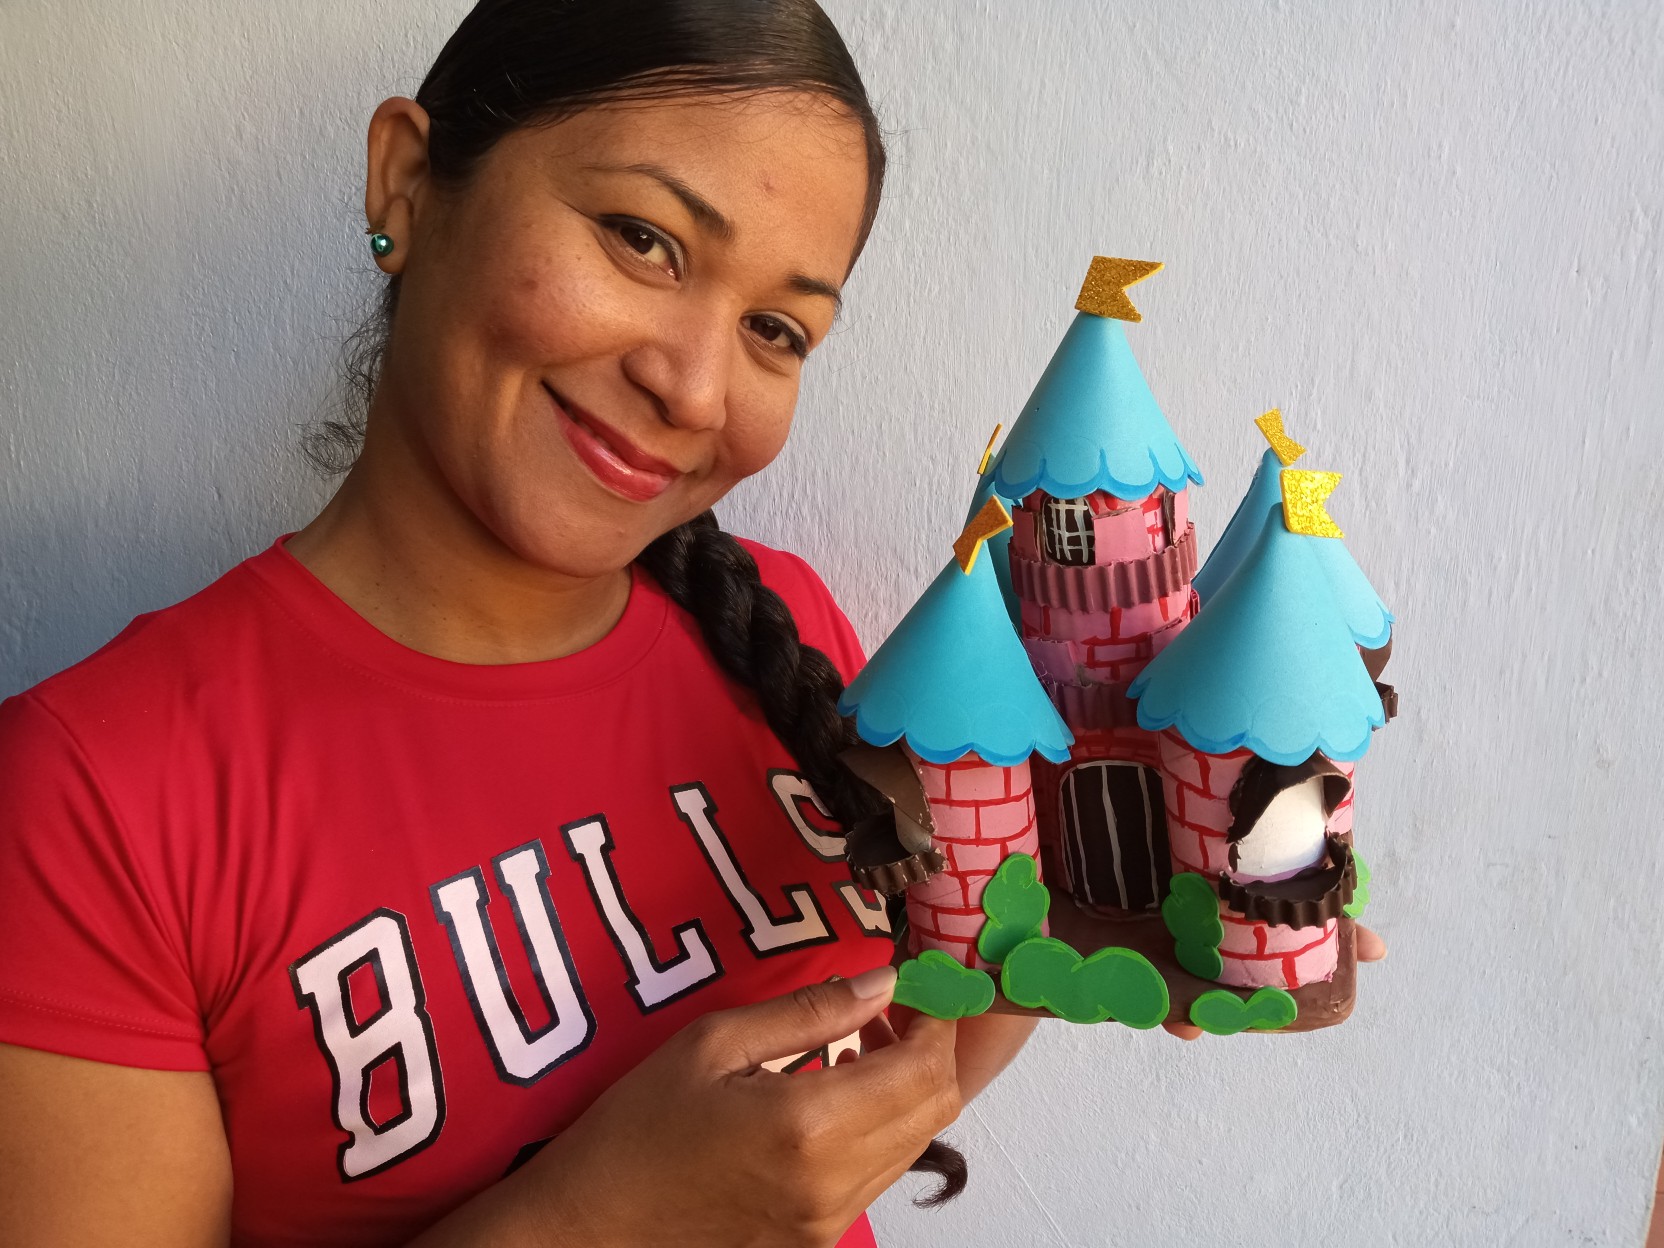 ESP-ENG] SEC-S10W4 / Manualidades con papel/ Paper Crafts. — Steemit, manualidades  papel crafting 